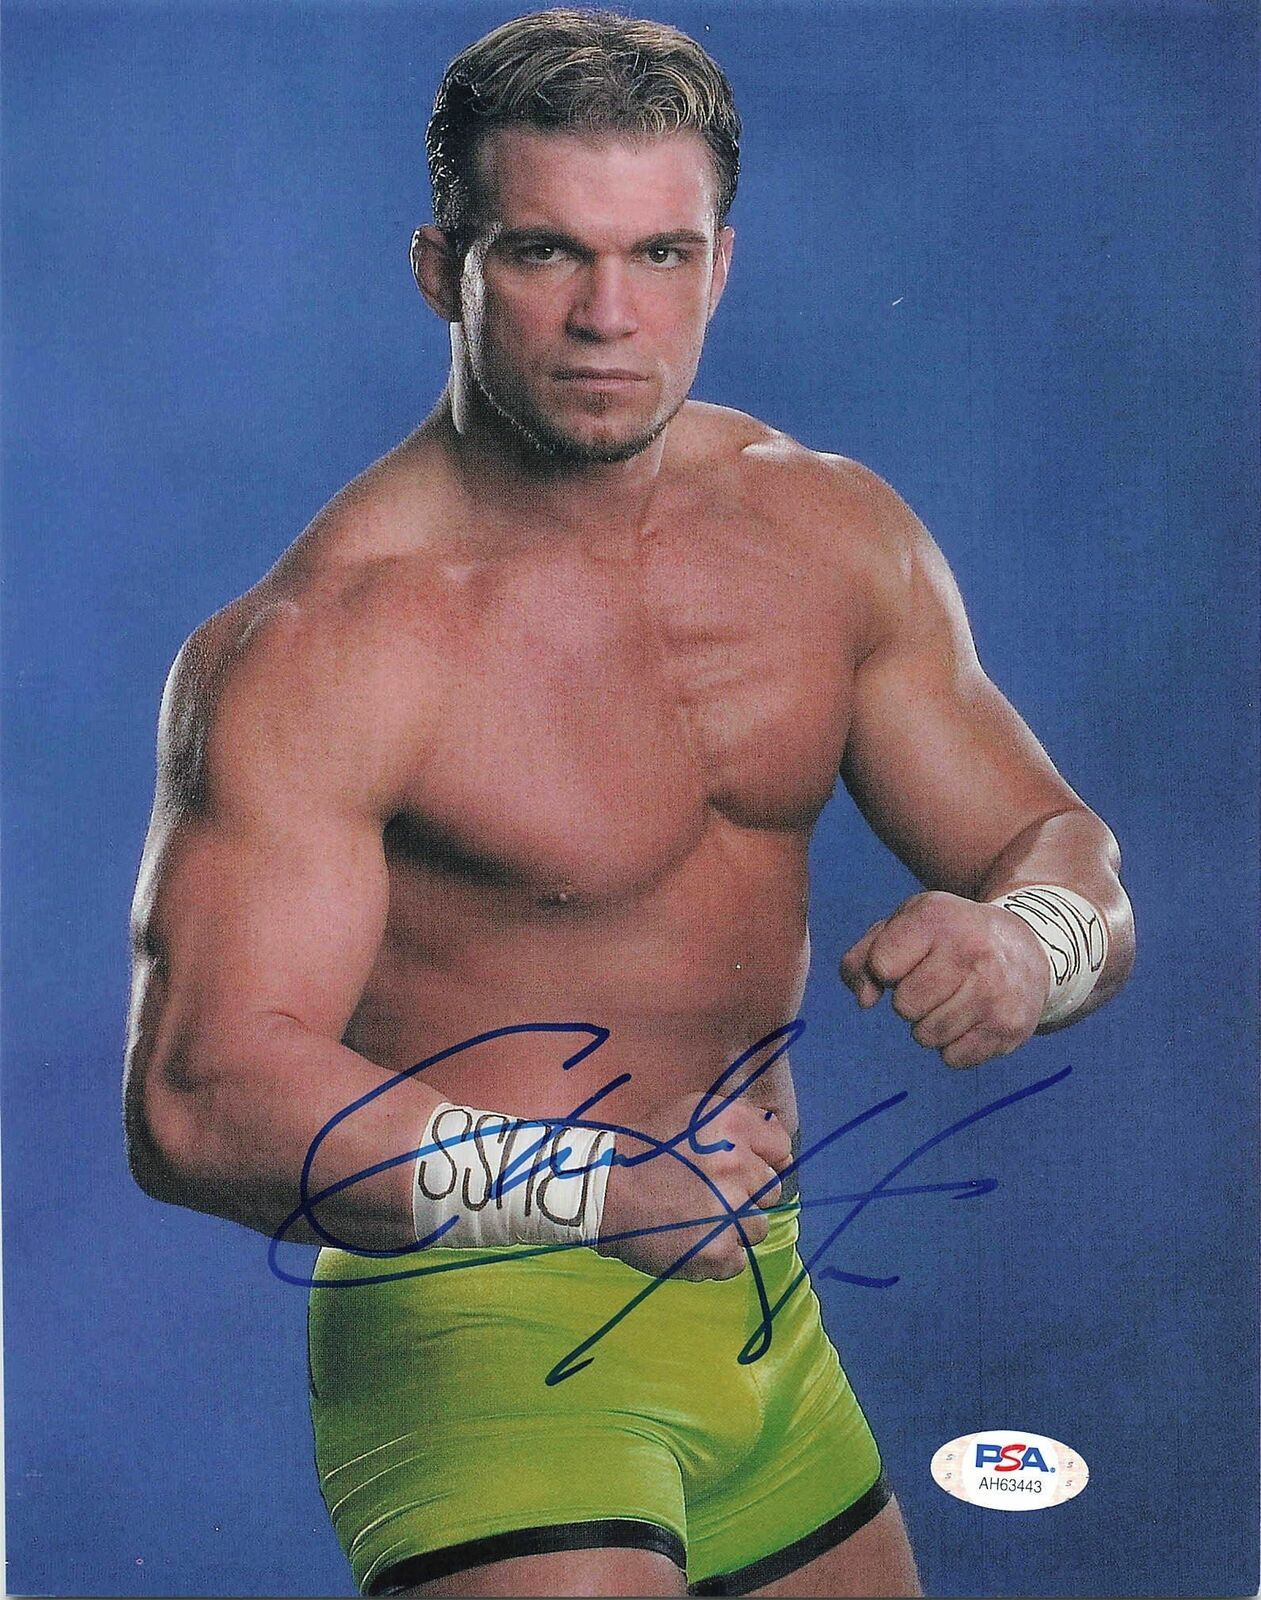 Primary image for Charlie Haas signed 8x10 photo PSA/DNA COA WWE Autographed Wrestling